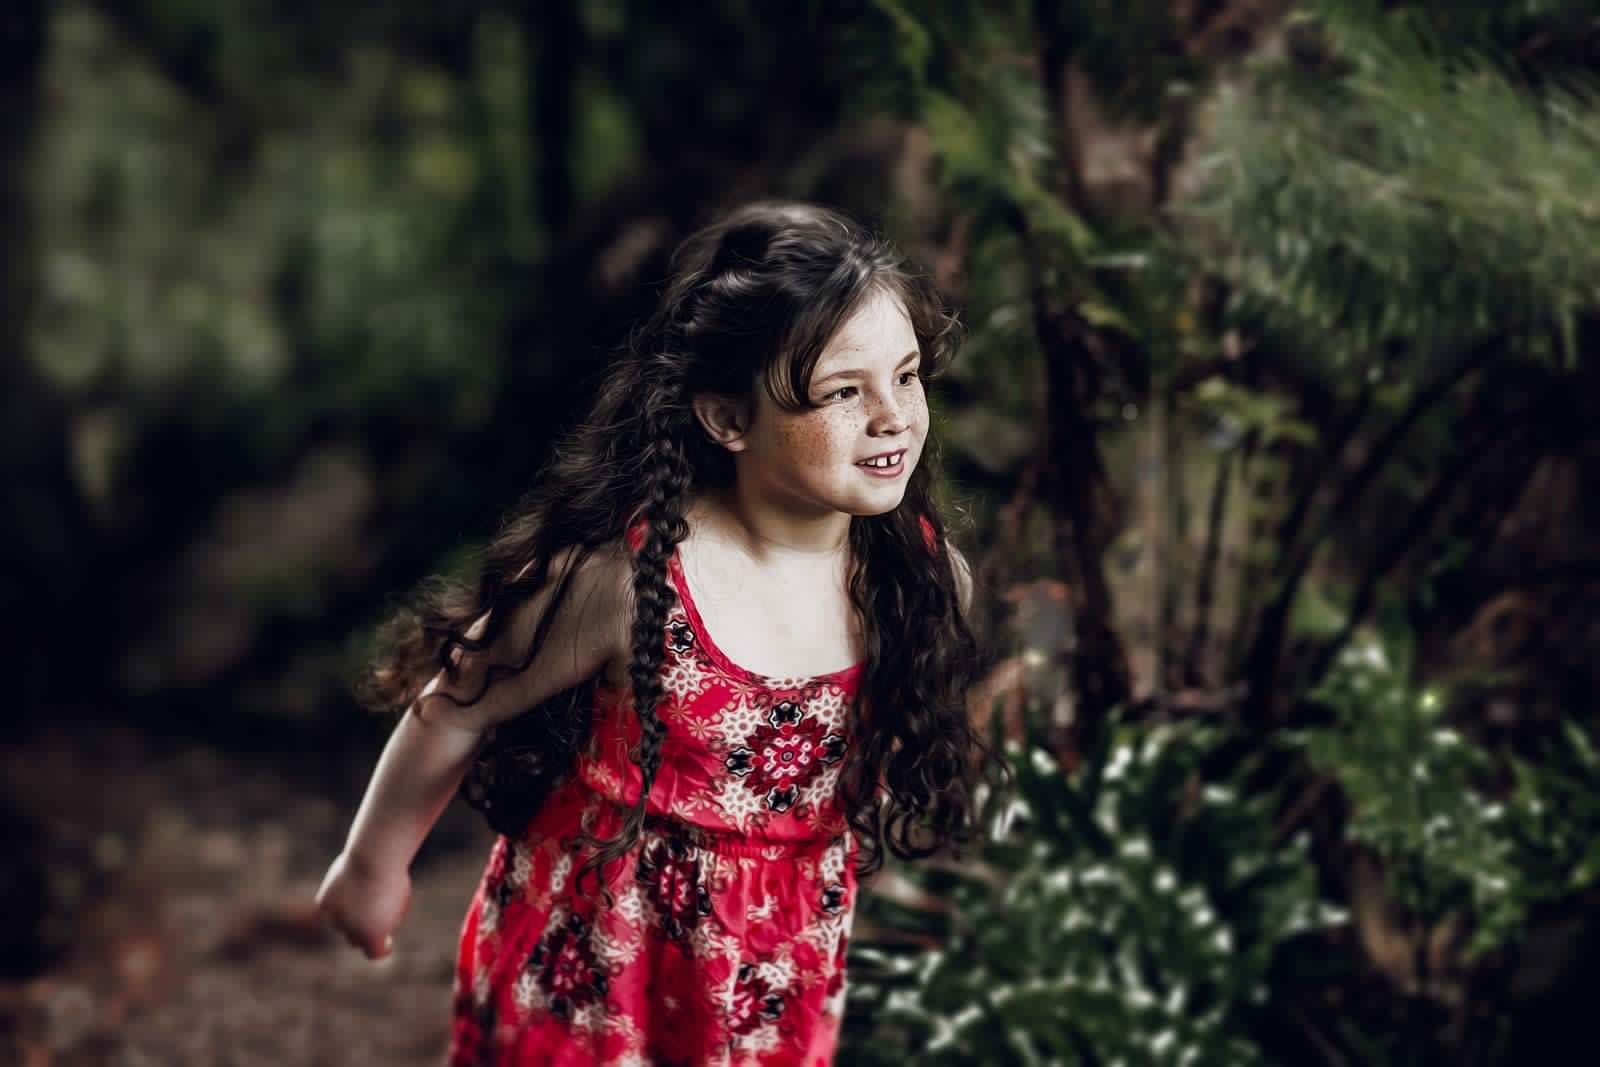 tween girl, long dark hair braided, red dress, in a forest looking curious